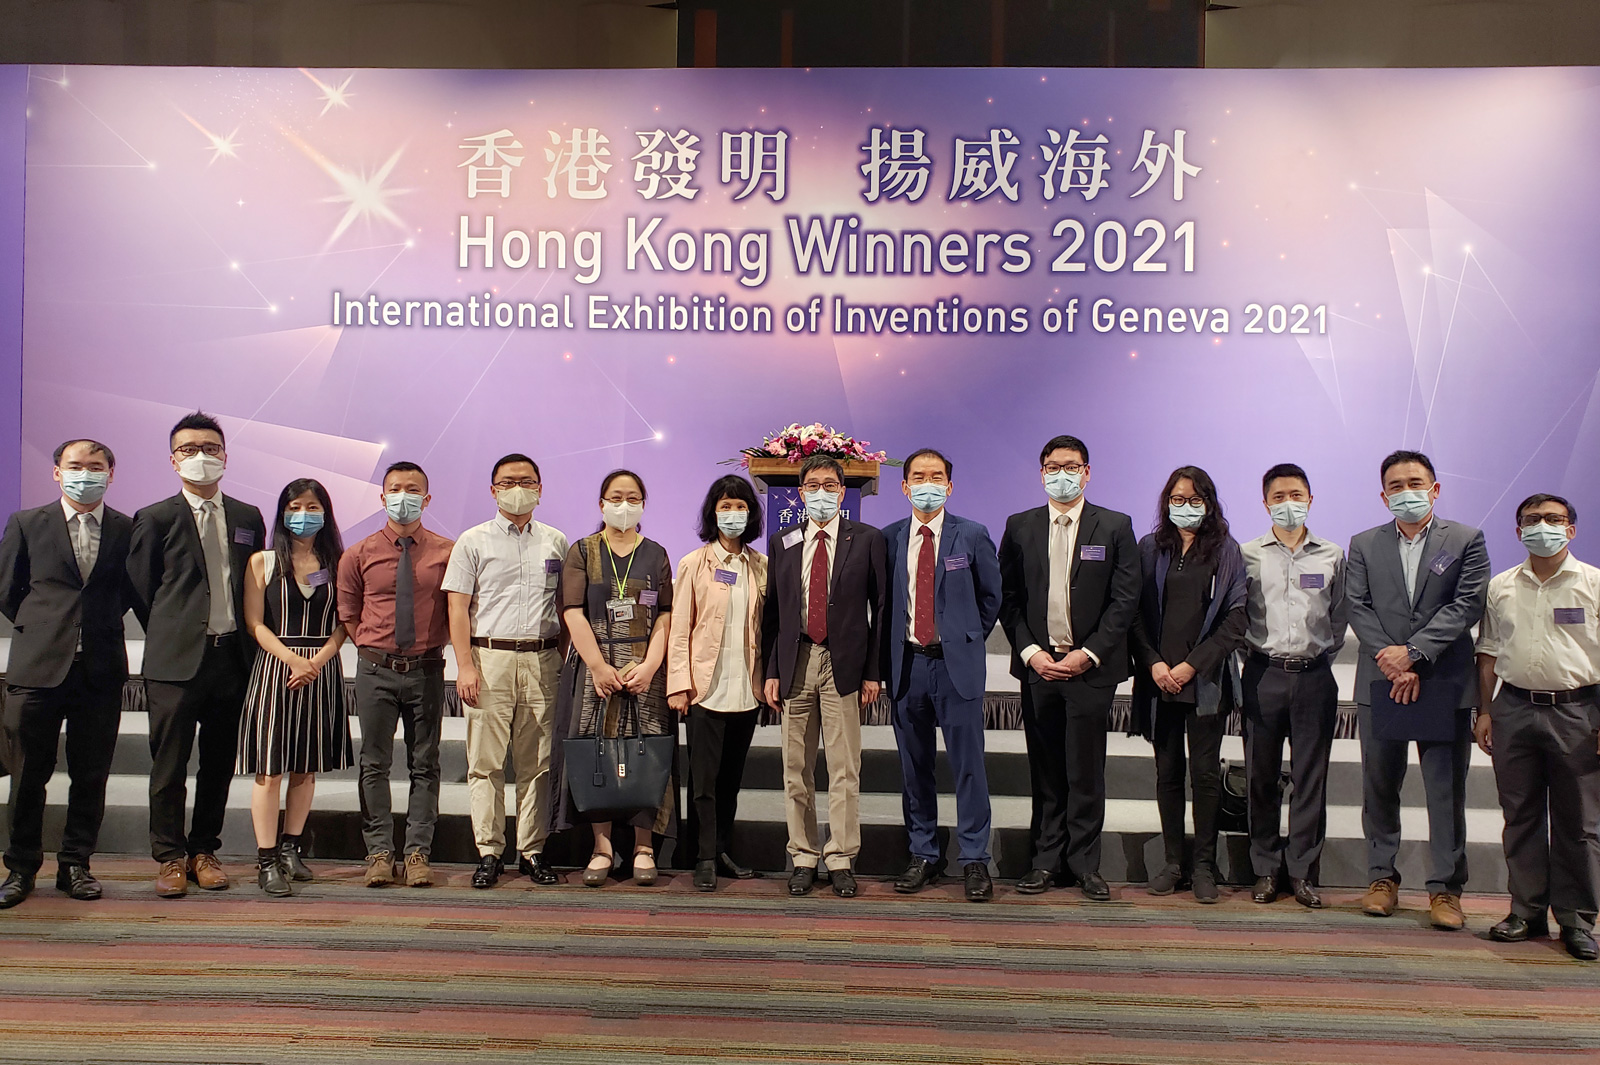 Researchers from CityU received 12 awards